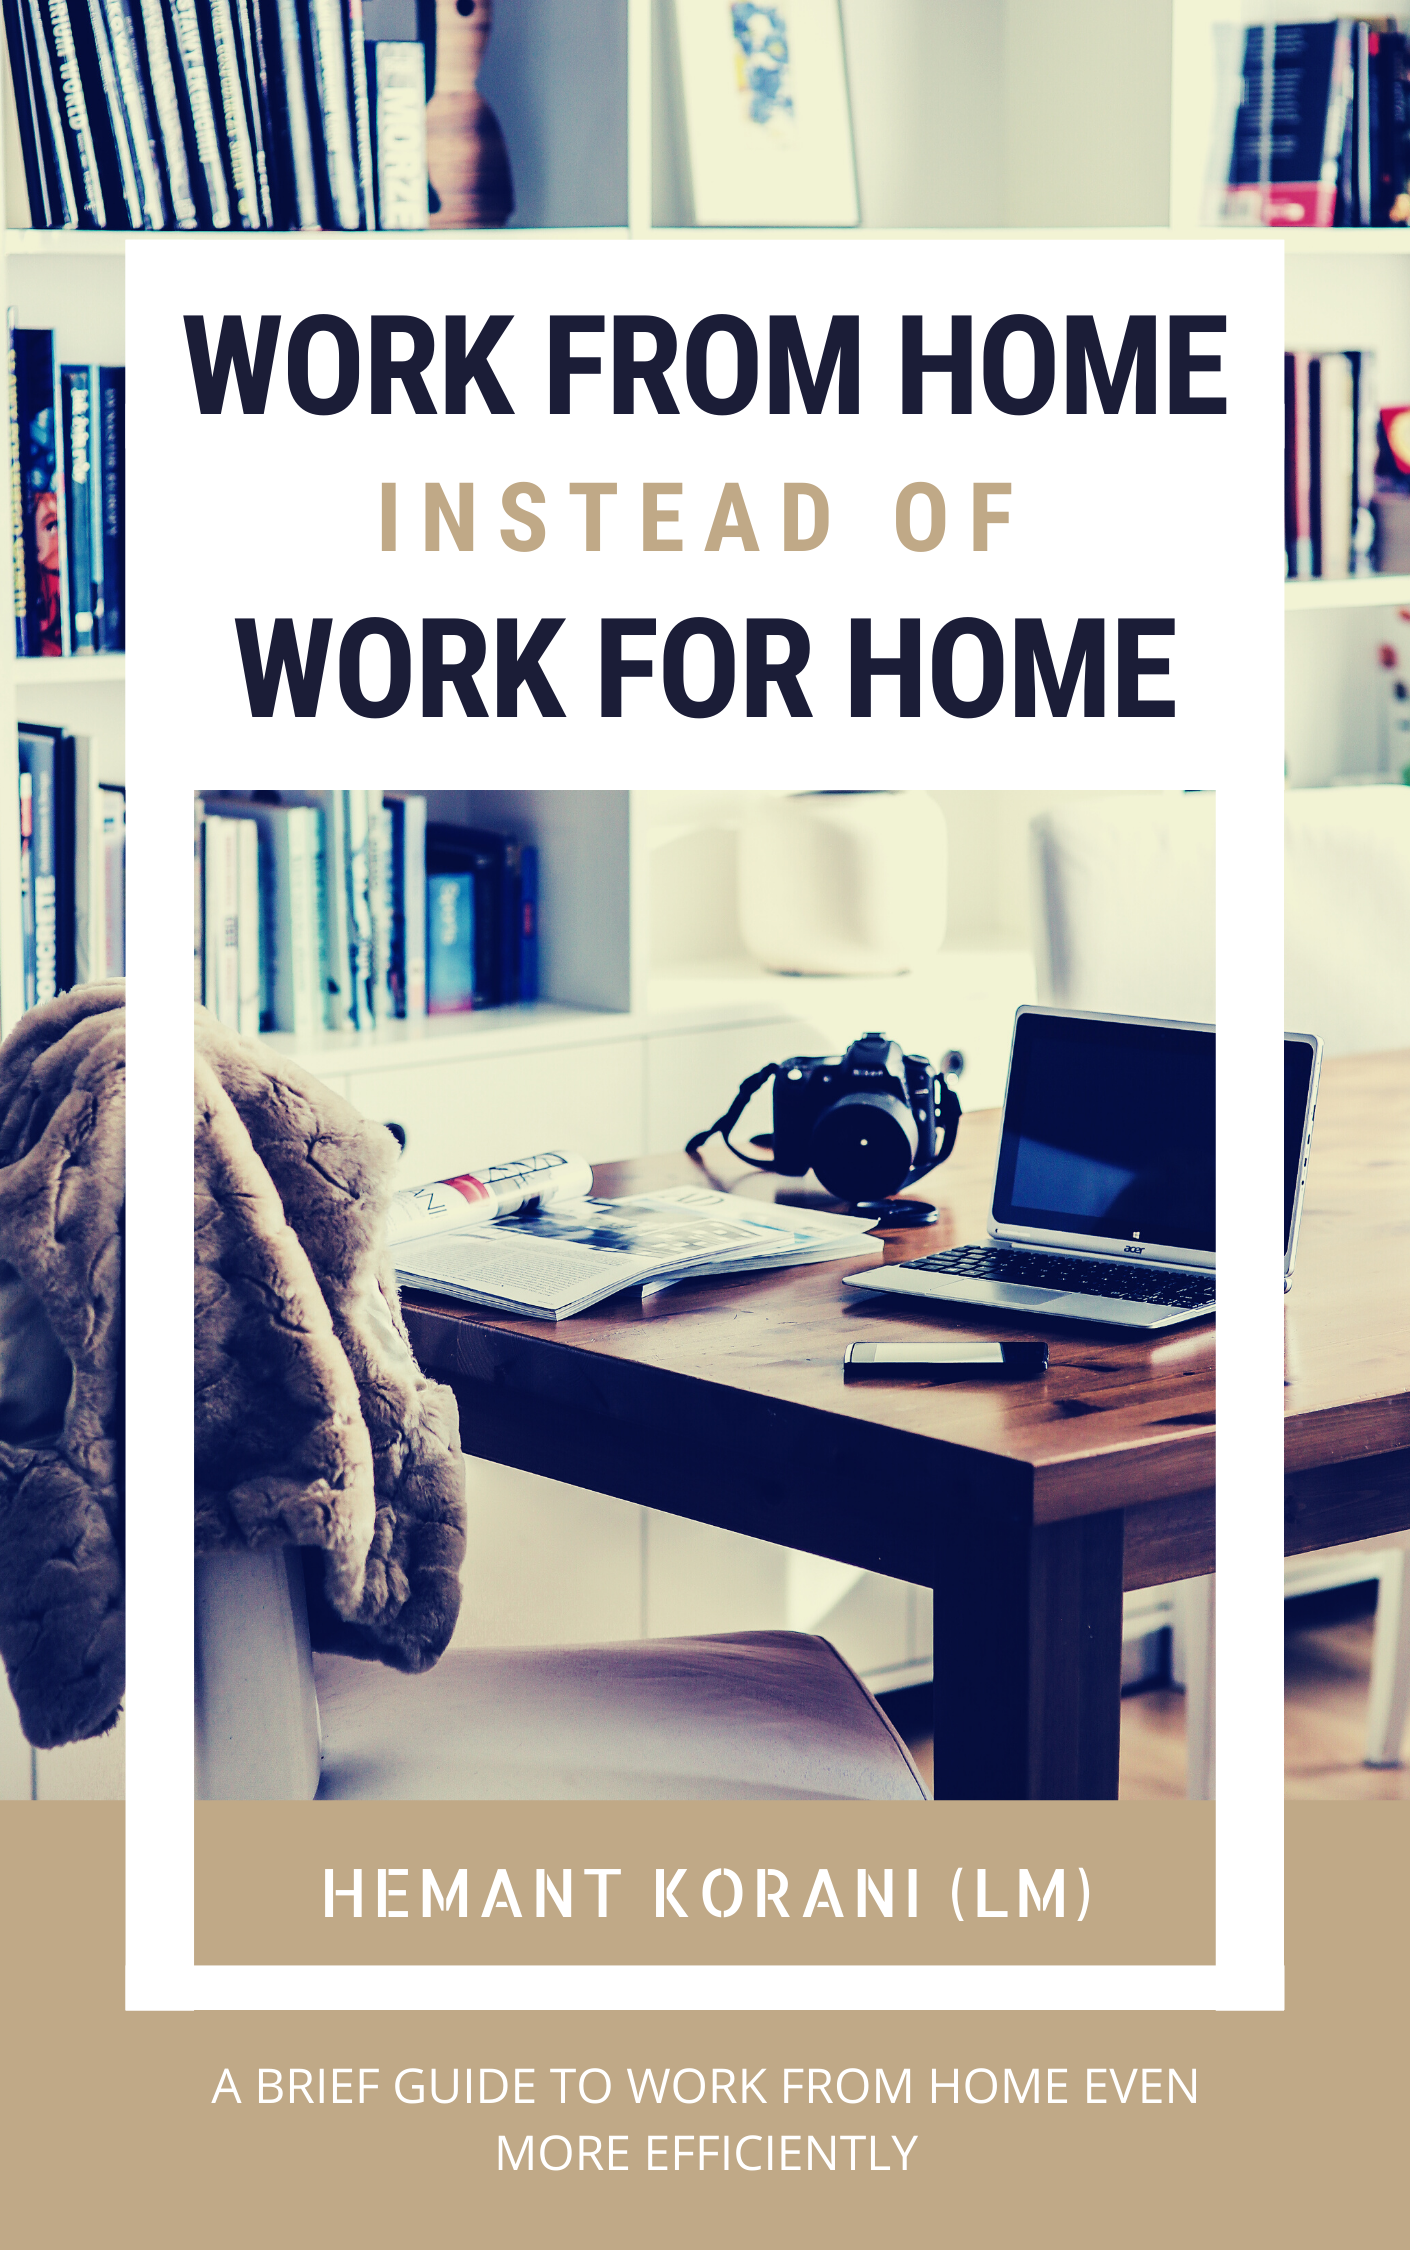 FREE: Work from Home instead of Work for Home by Hemant Korani (LM)